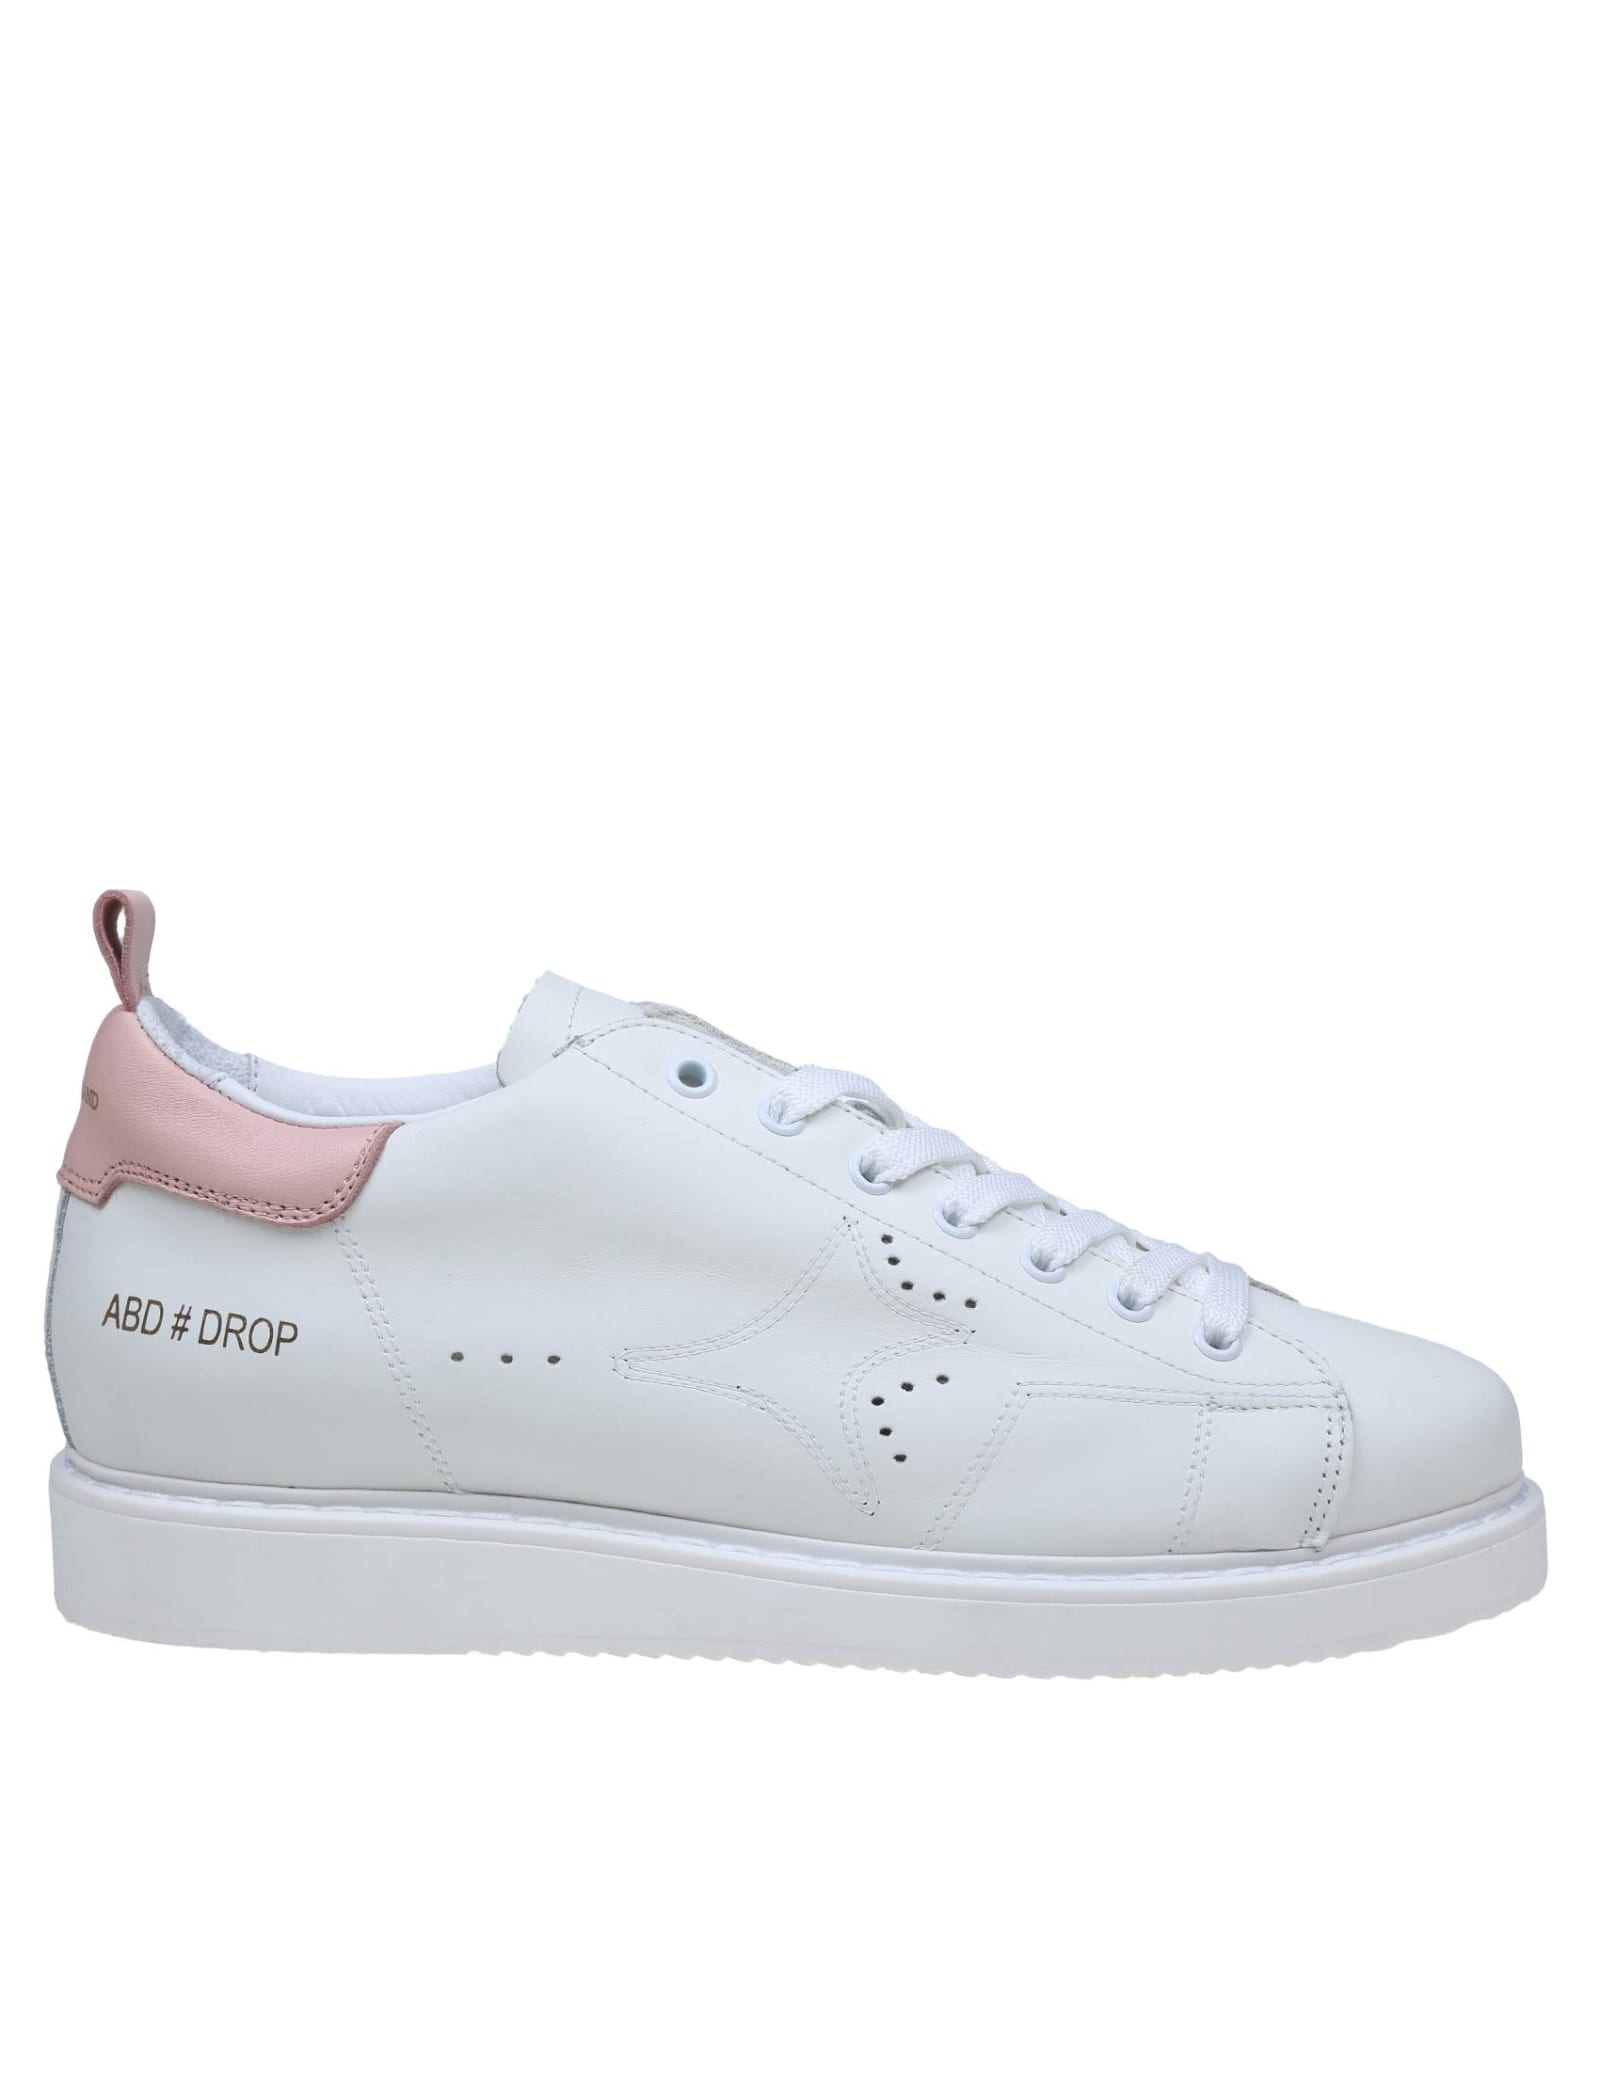 Ama Brand Leather Sneakers In White/pink